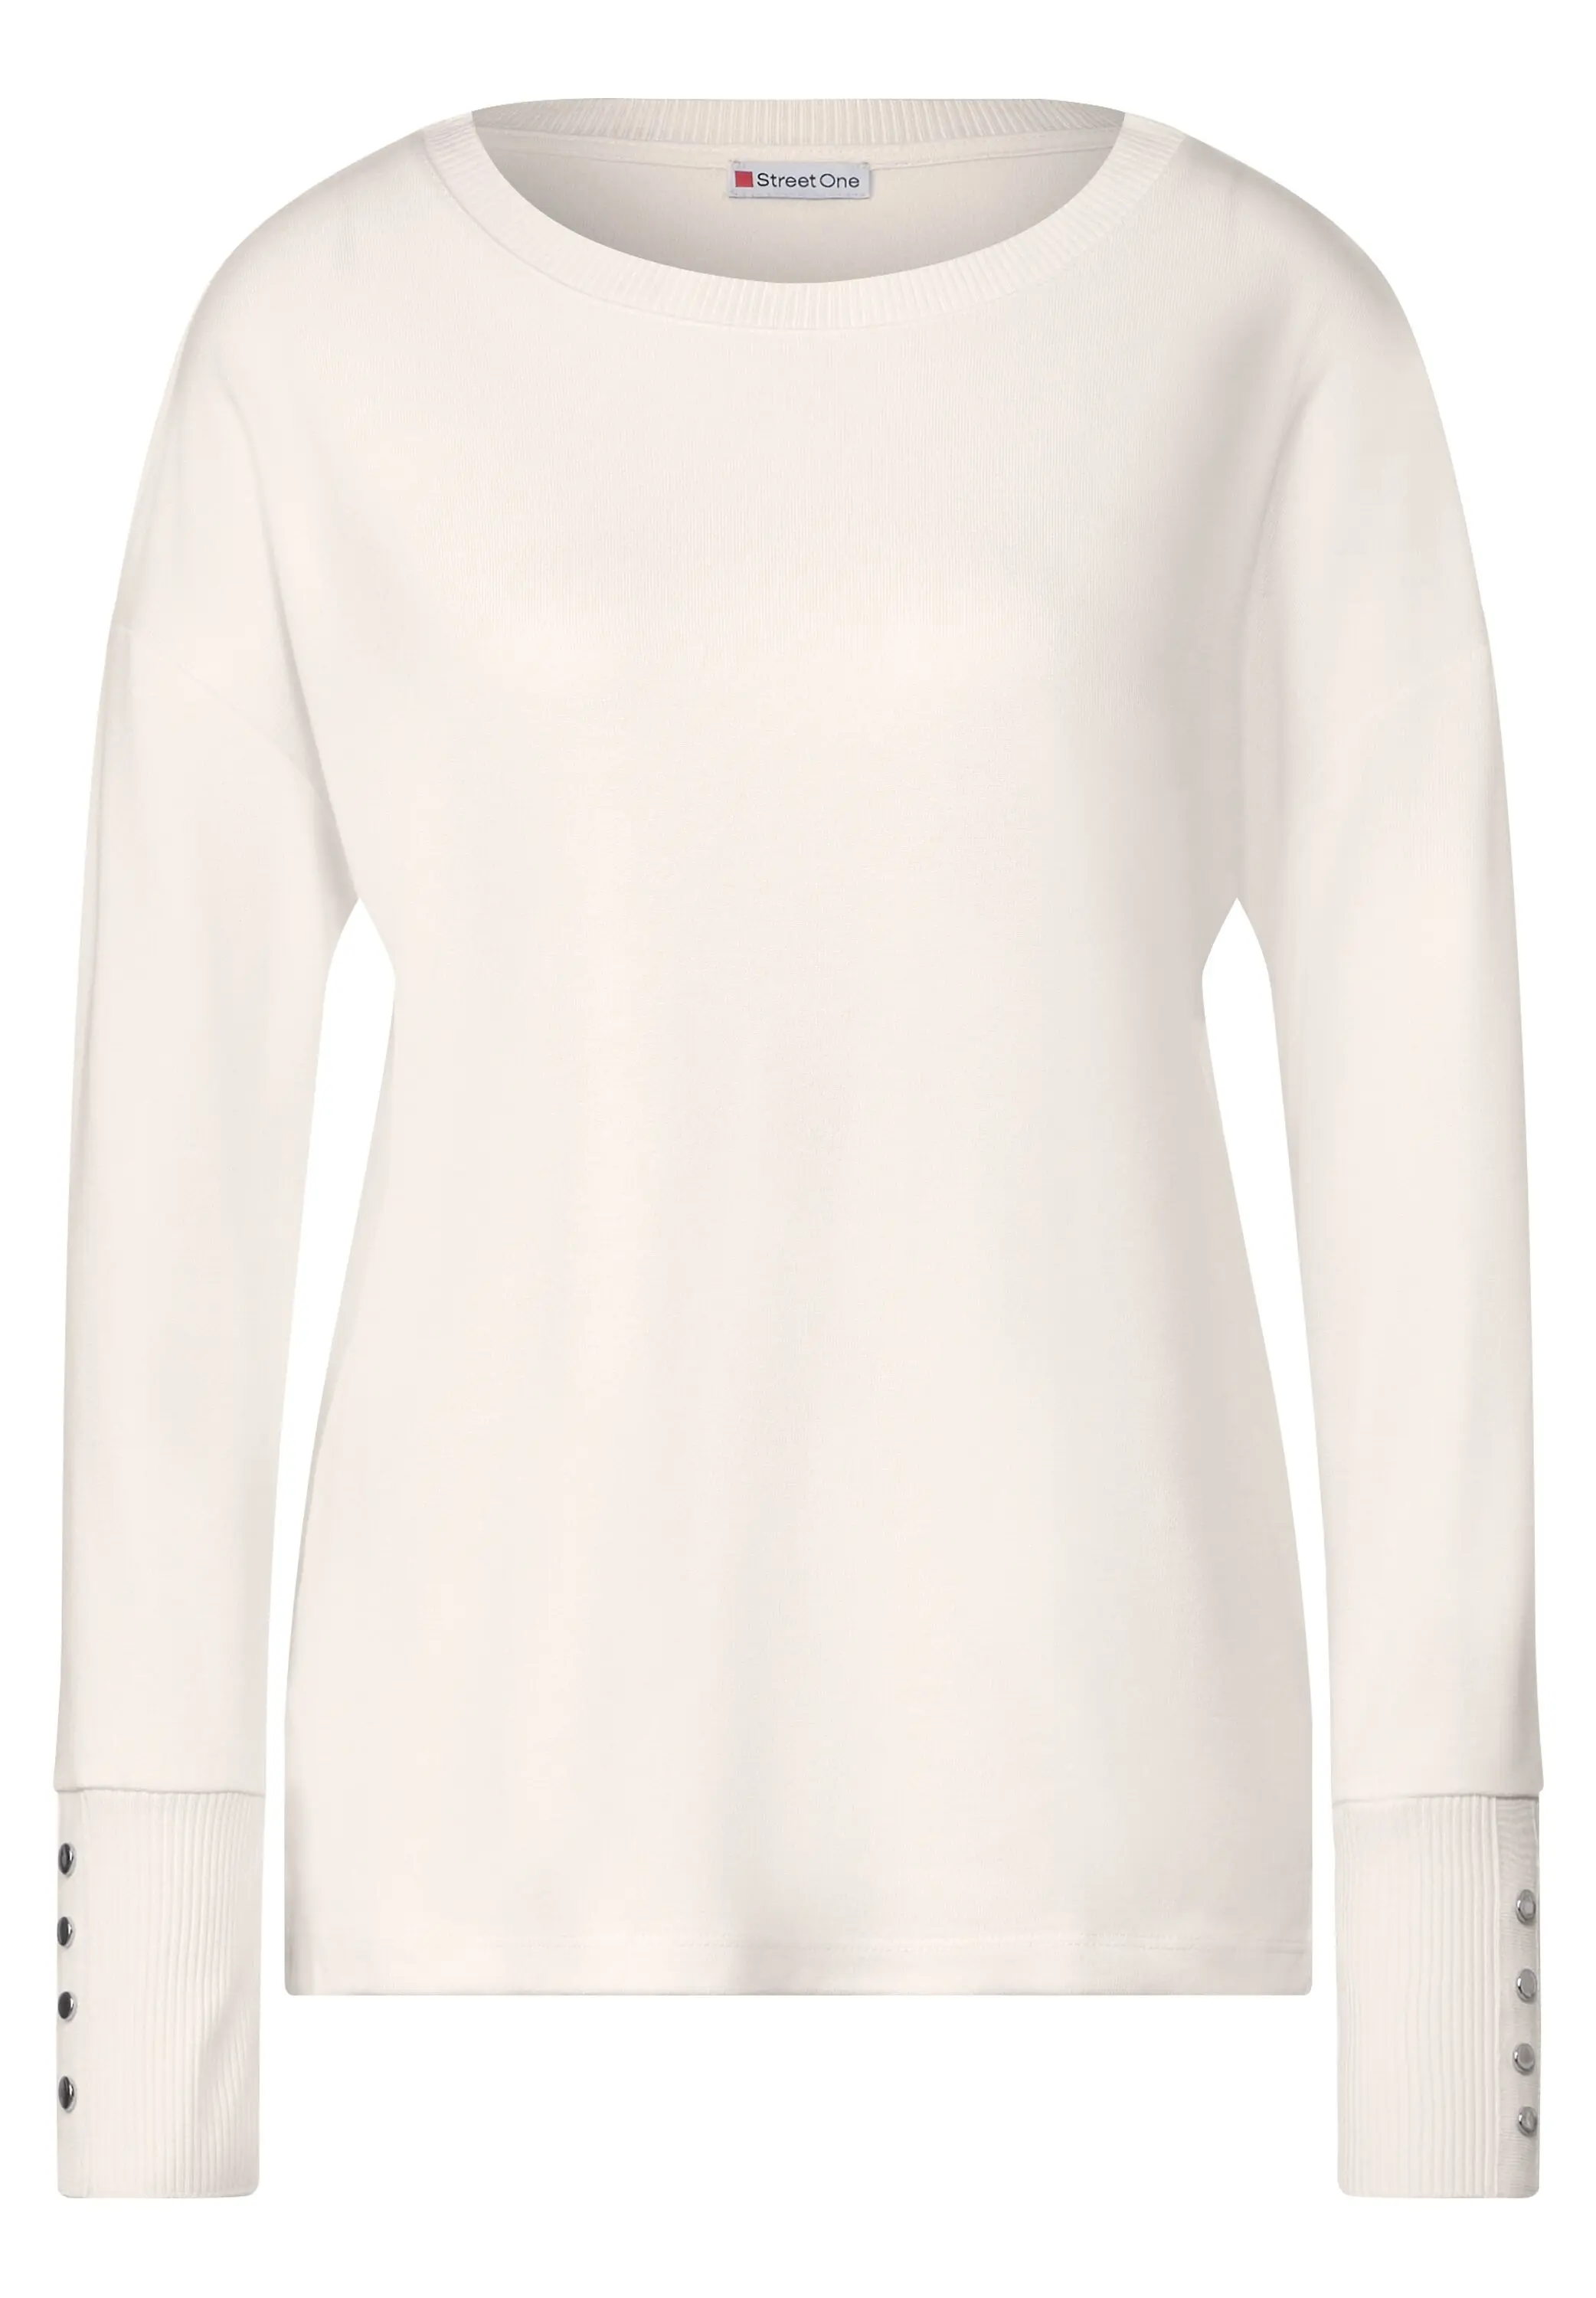 Street One Shirt mit Knopfdetail | lucid white | 34